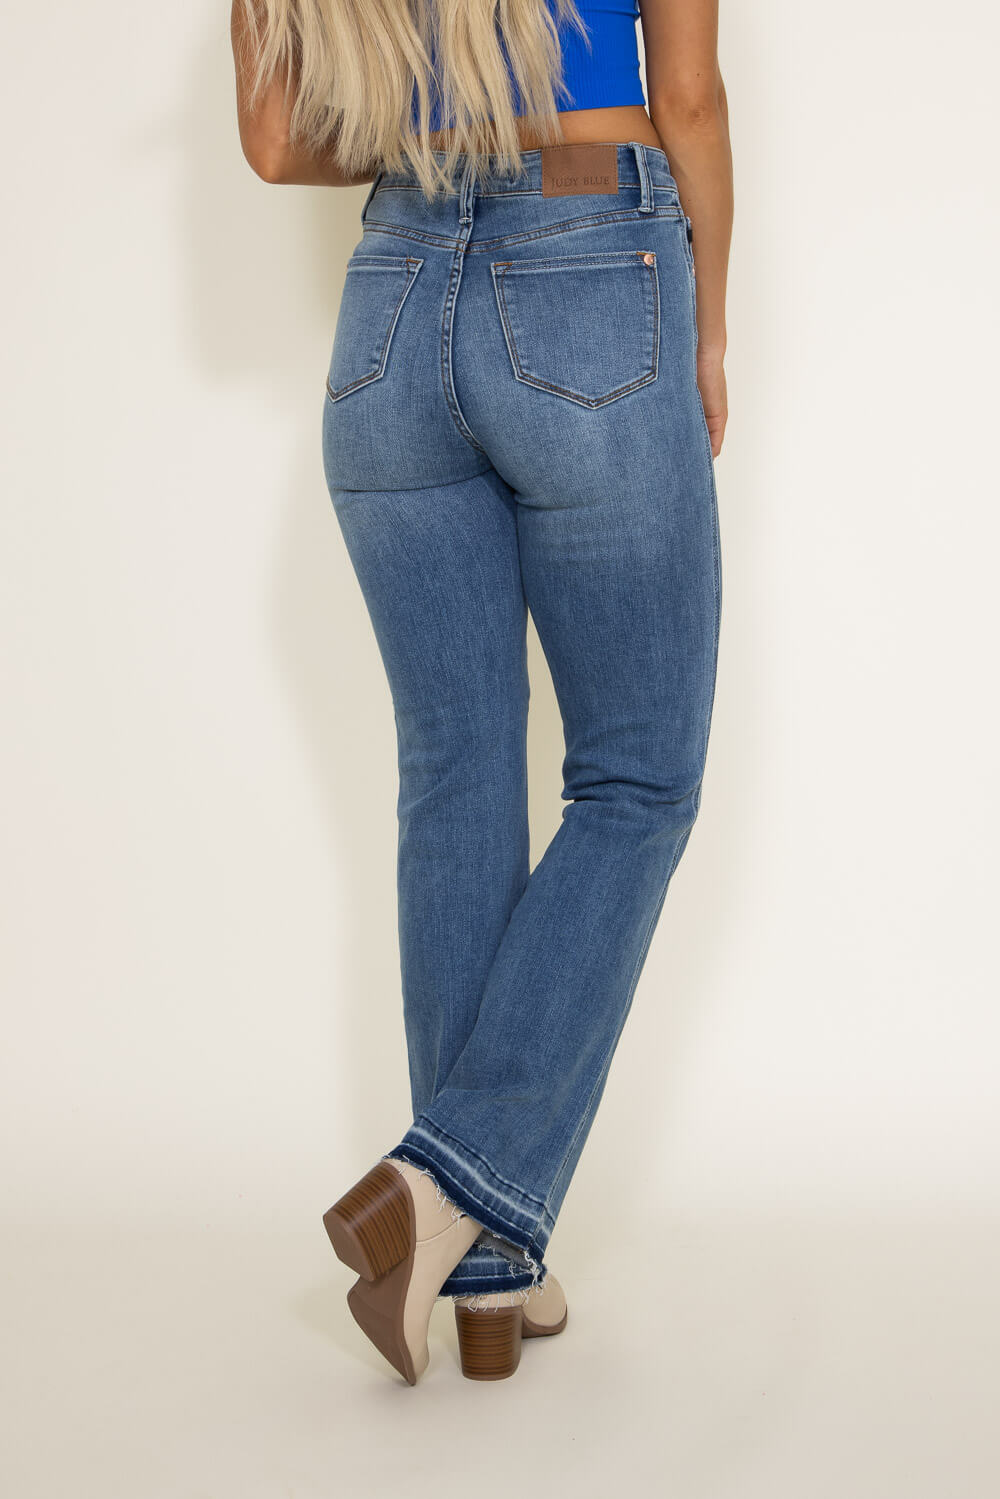 In the Fast Lane Bootcut Judy Blue Jeans